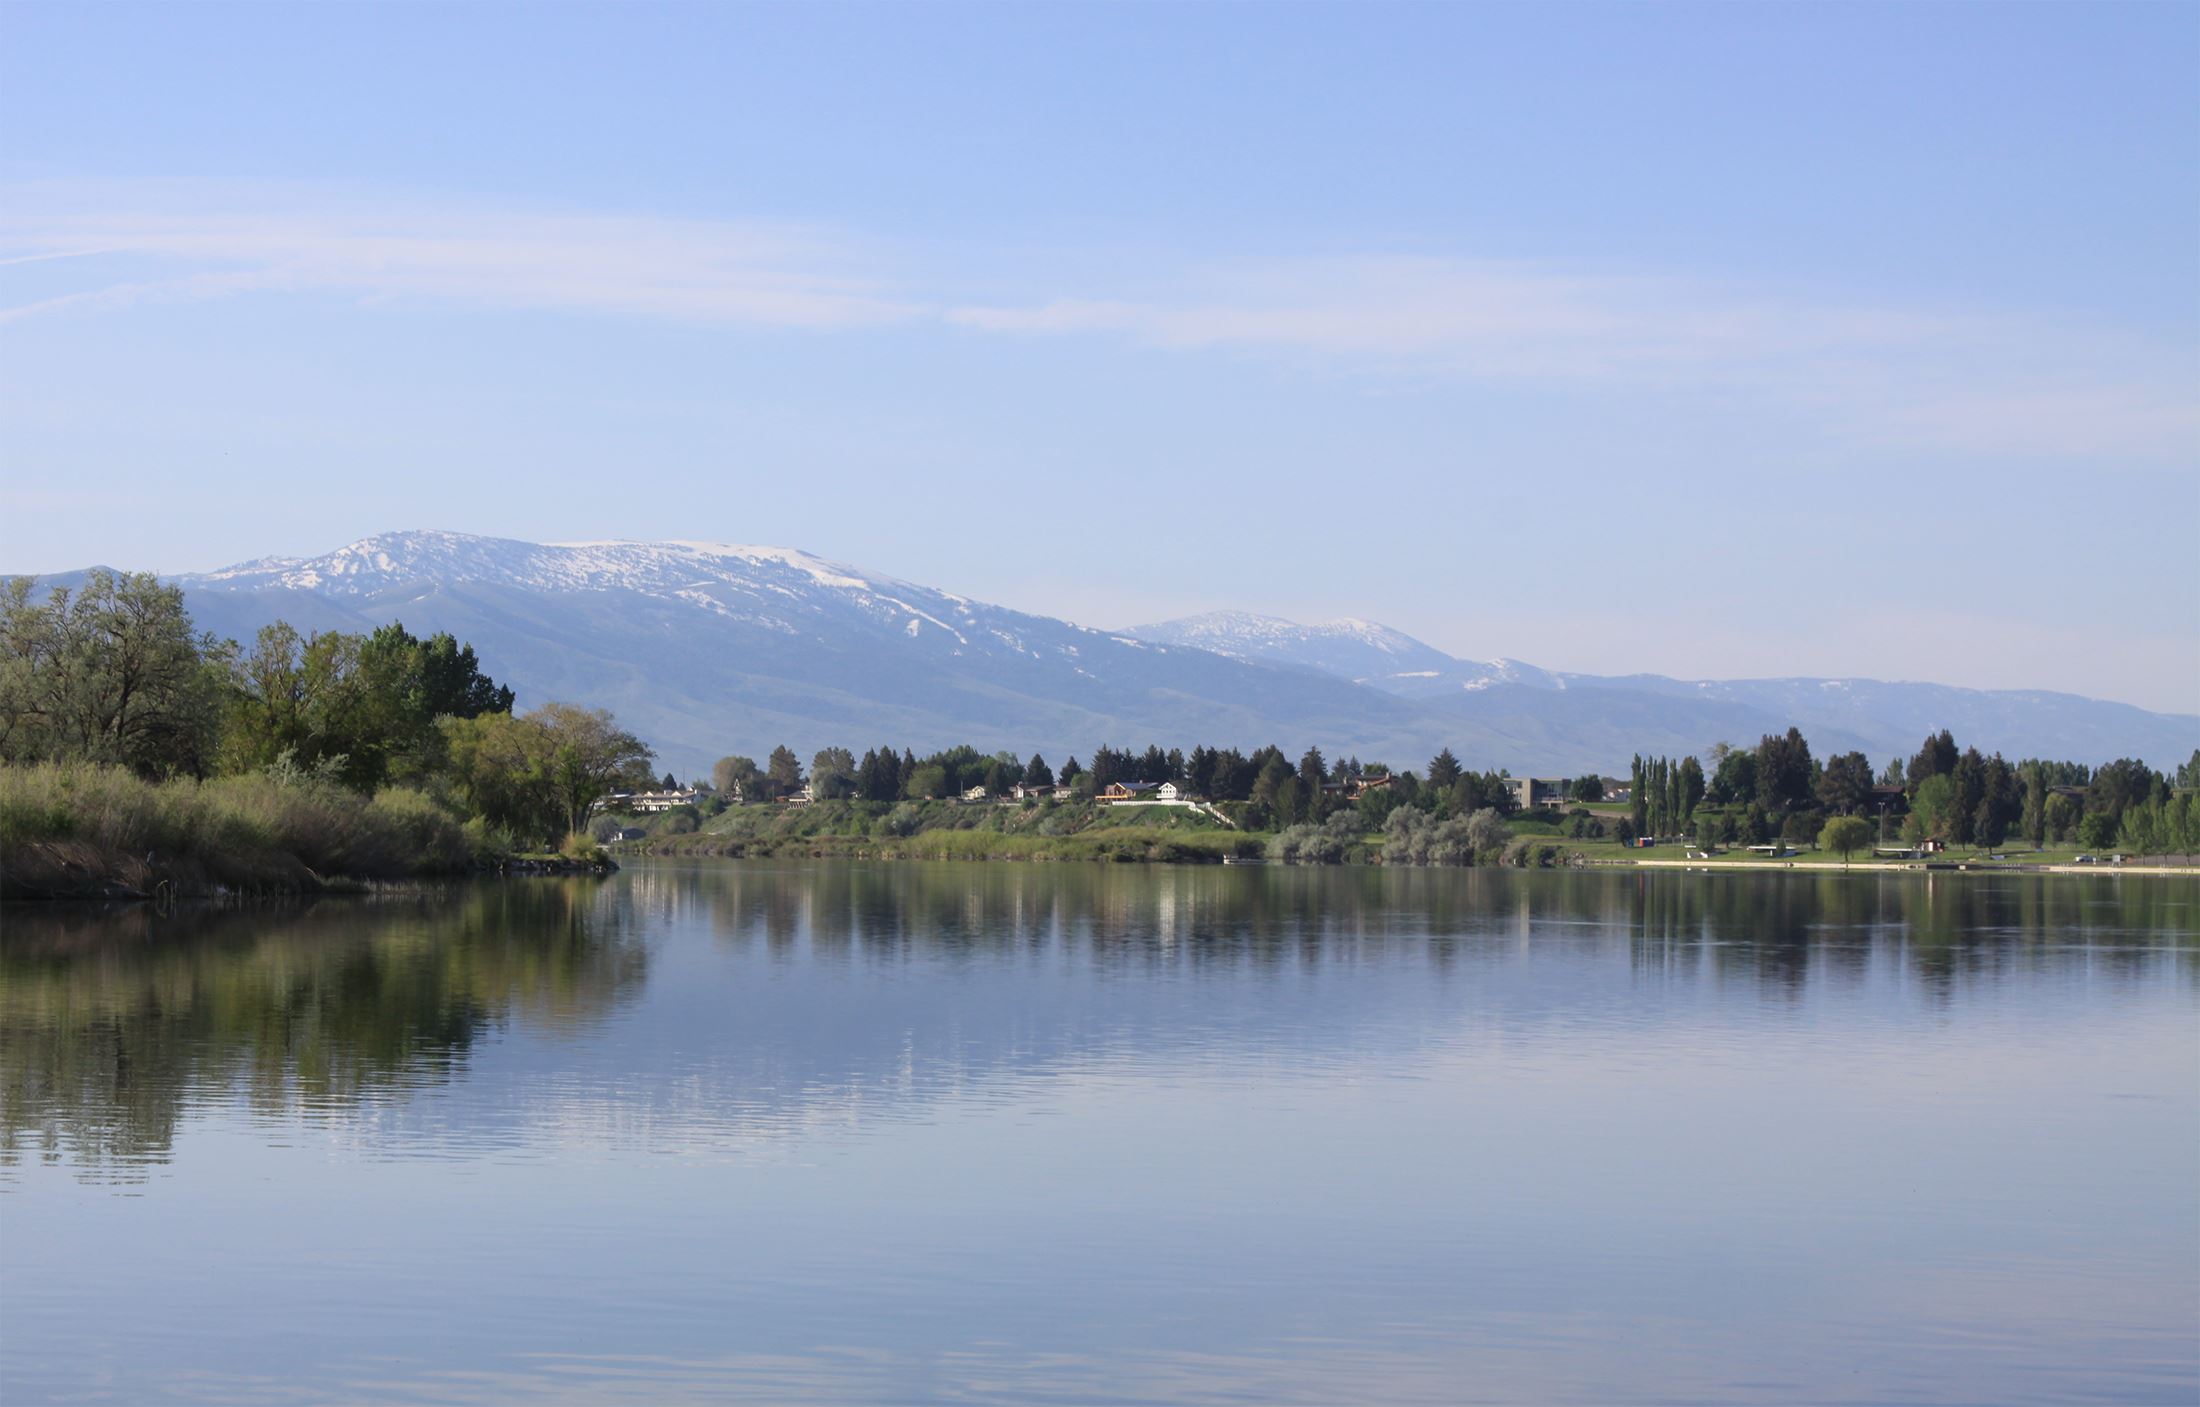 A lake with snowy mountains in the background